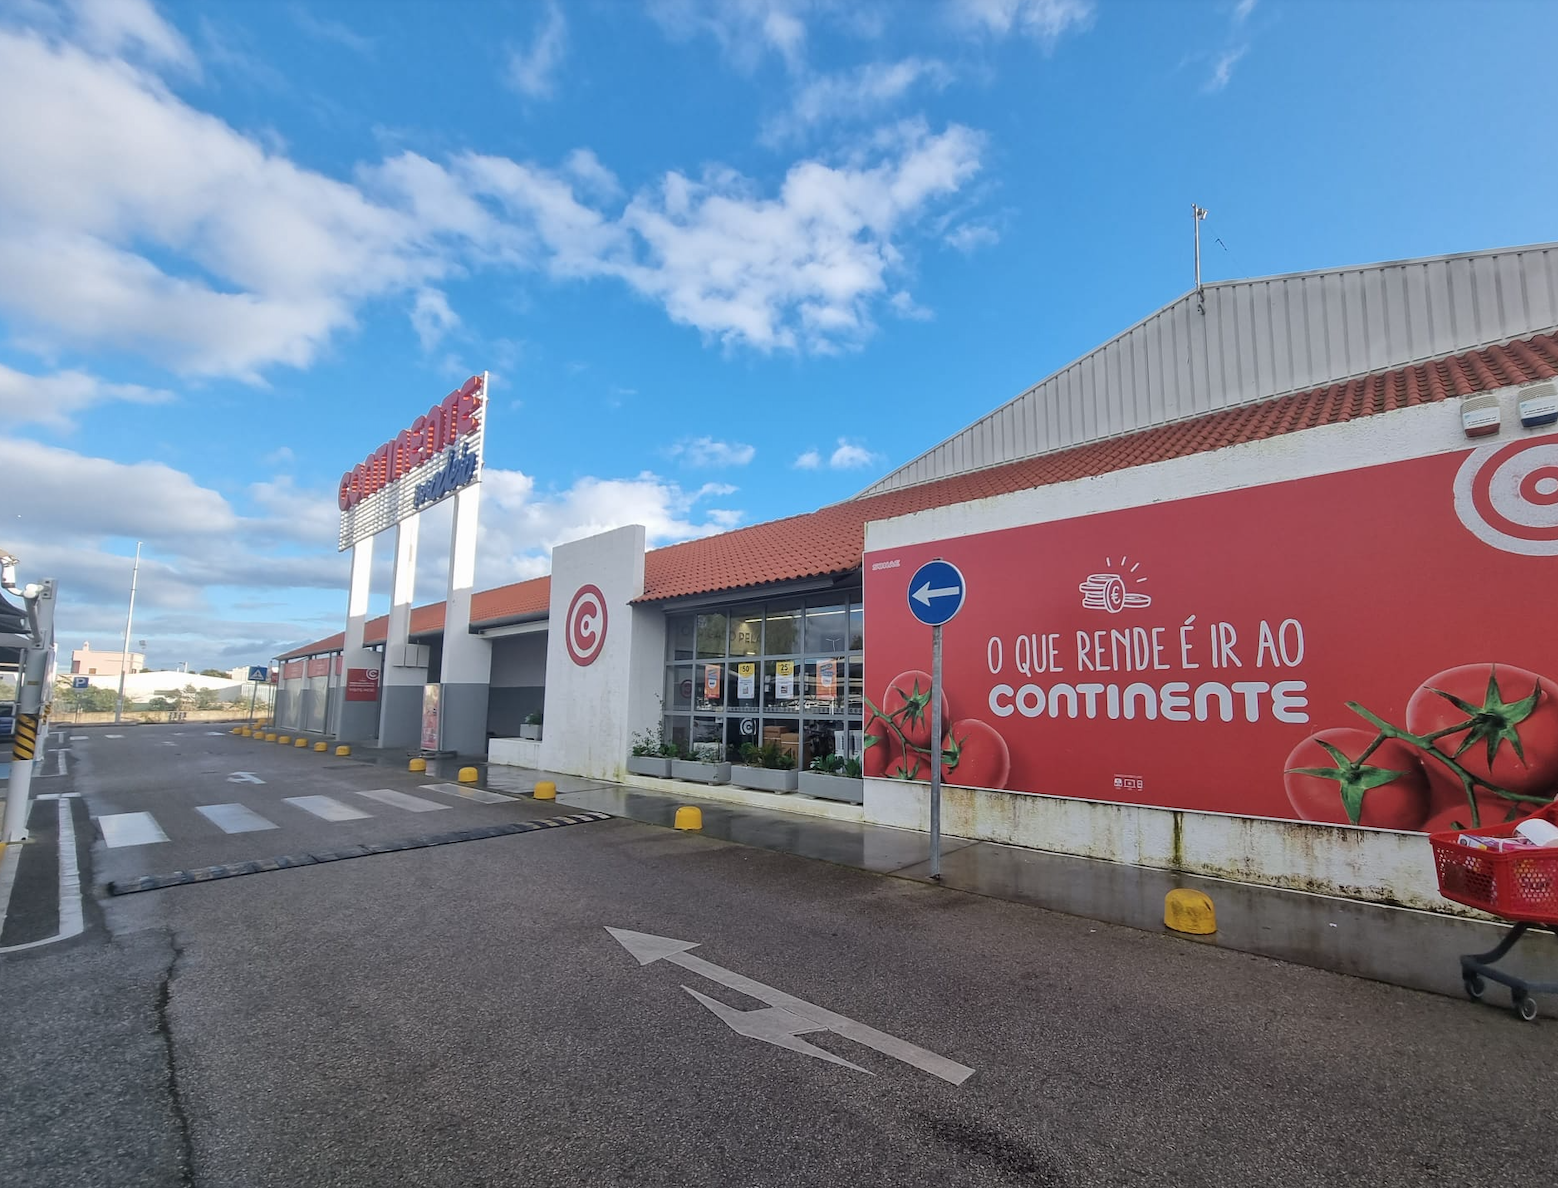 Savills IM buys 4 supermarkets in Portugal for €39M